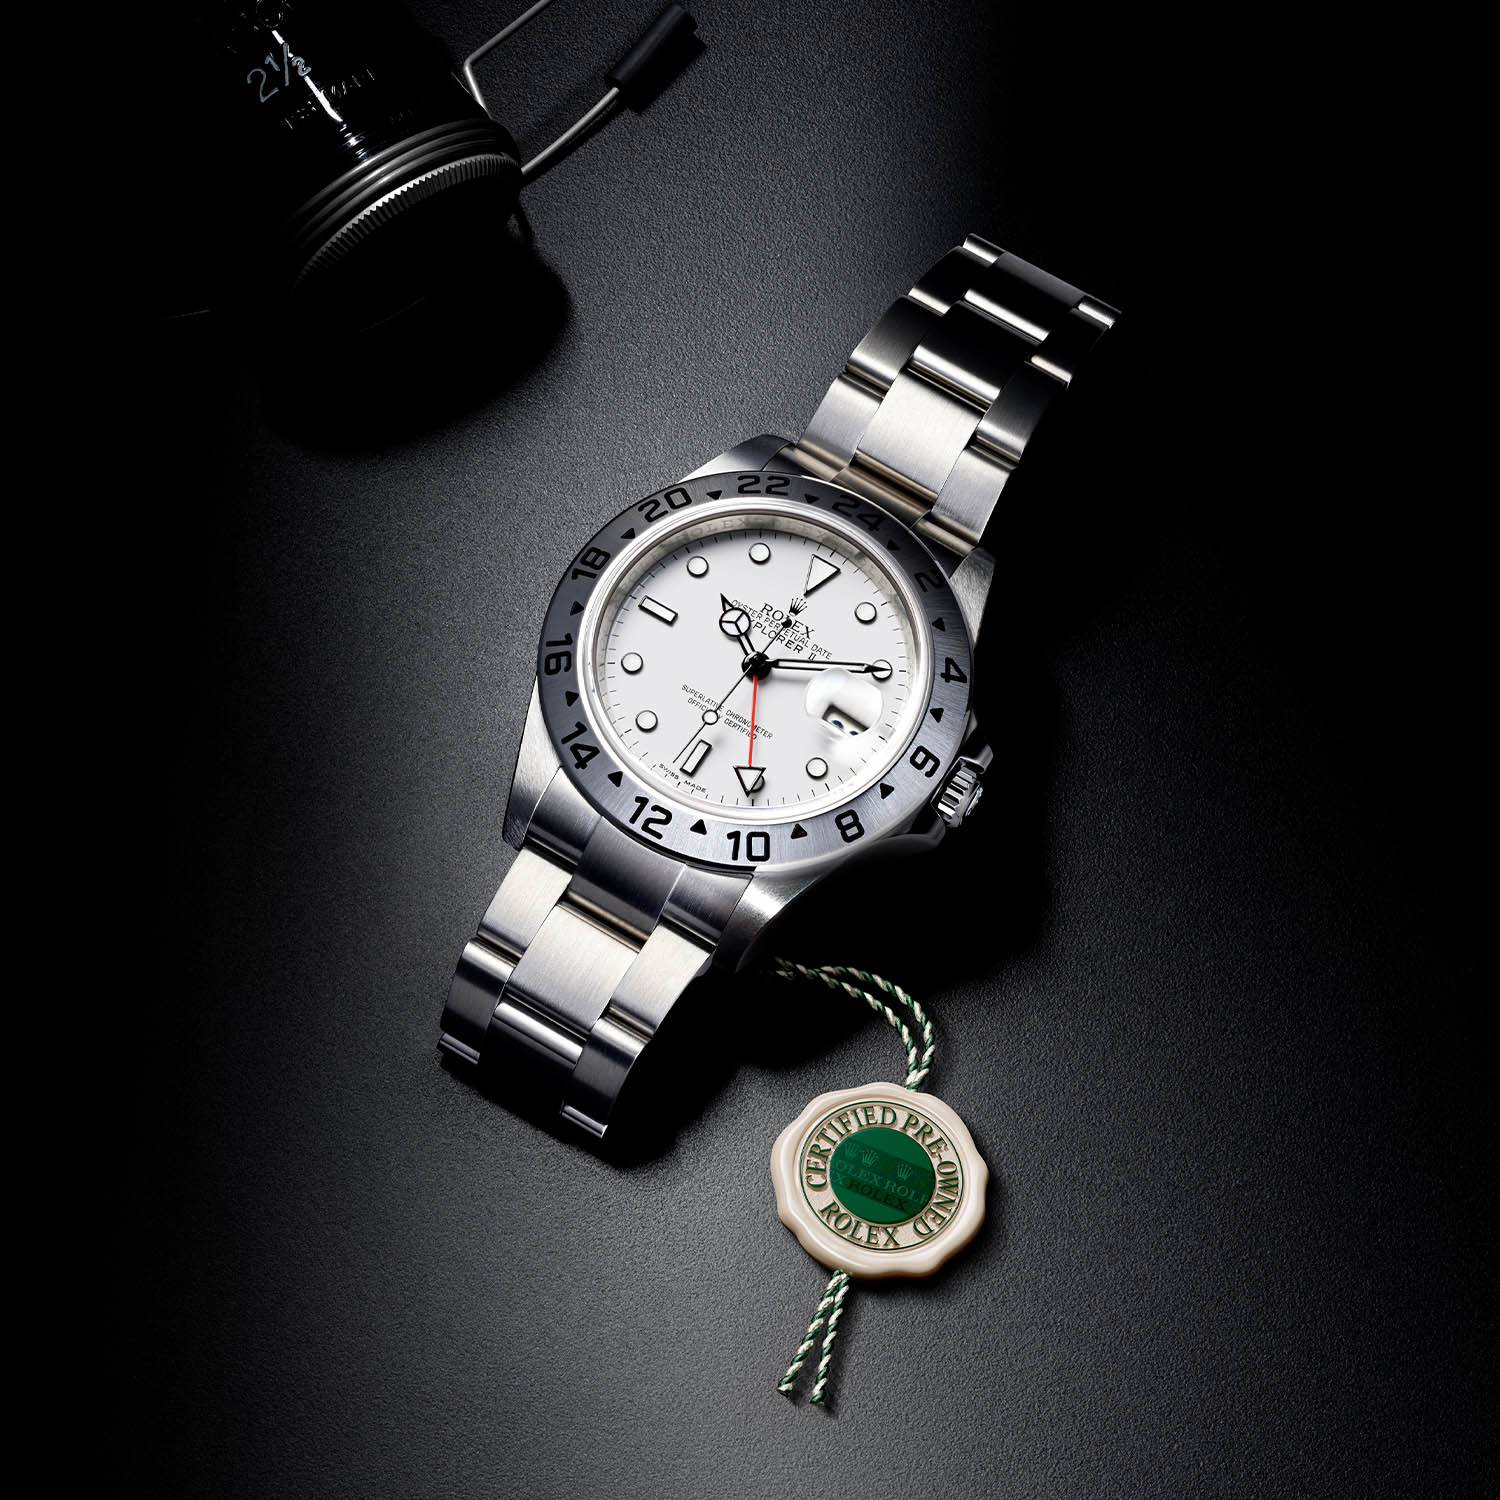 Rolex Certified Pre-Owned Programme